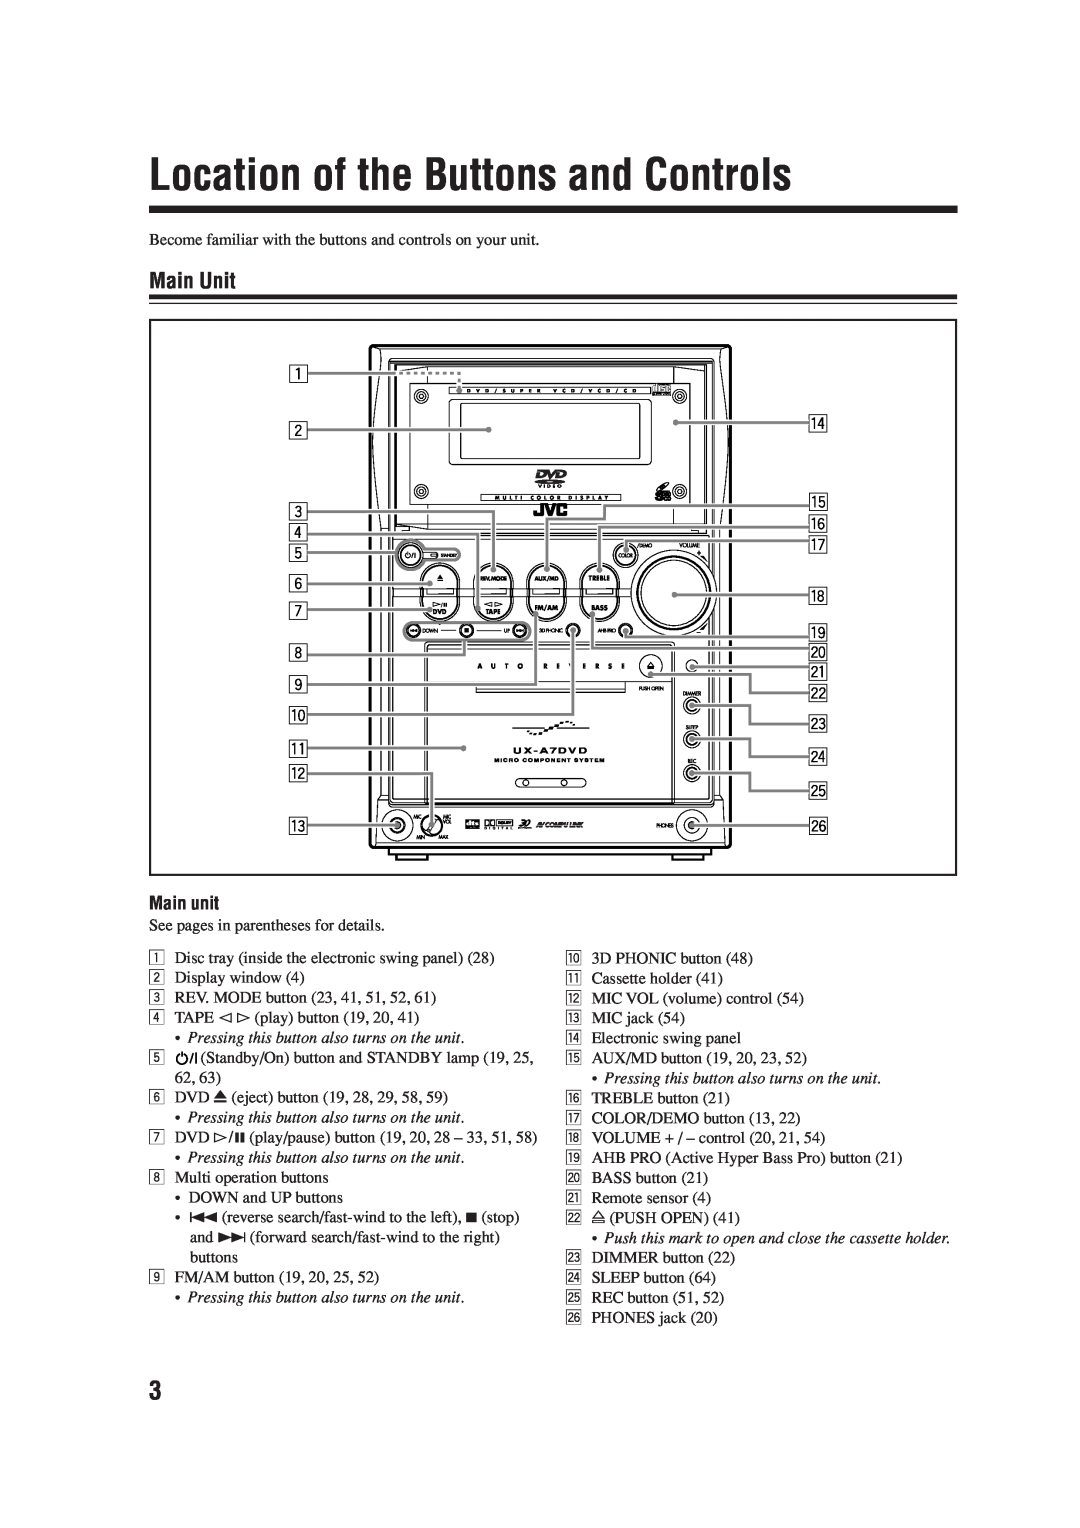 JVC CA-UXA7DVD, SP-UXA7DVD, UX-A7DVD manual Location of the Buttons and Controls, Main Unit 